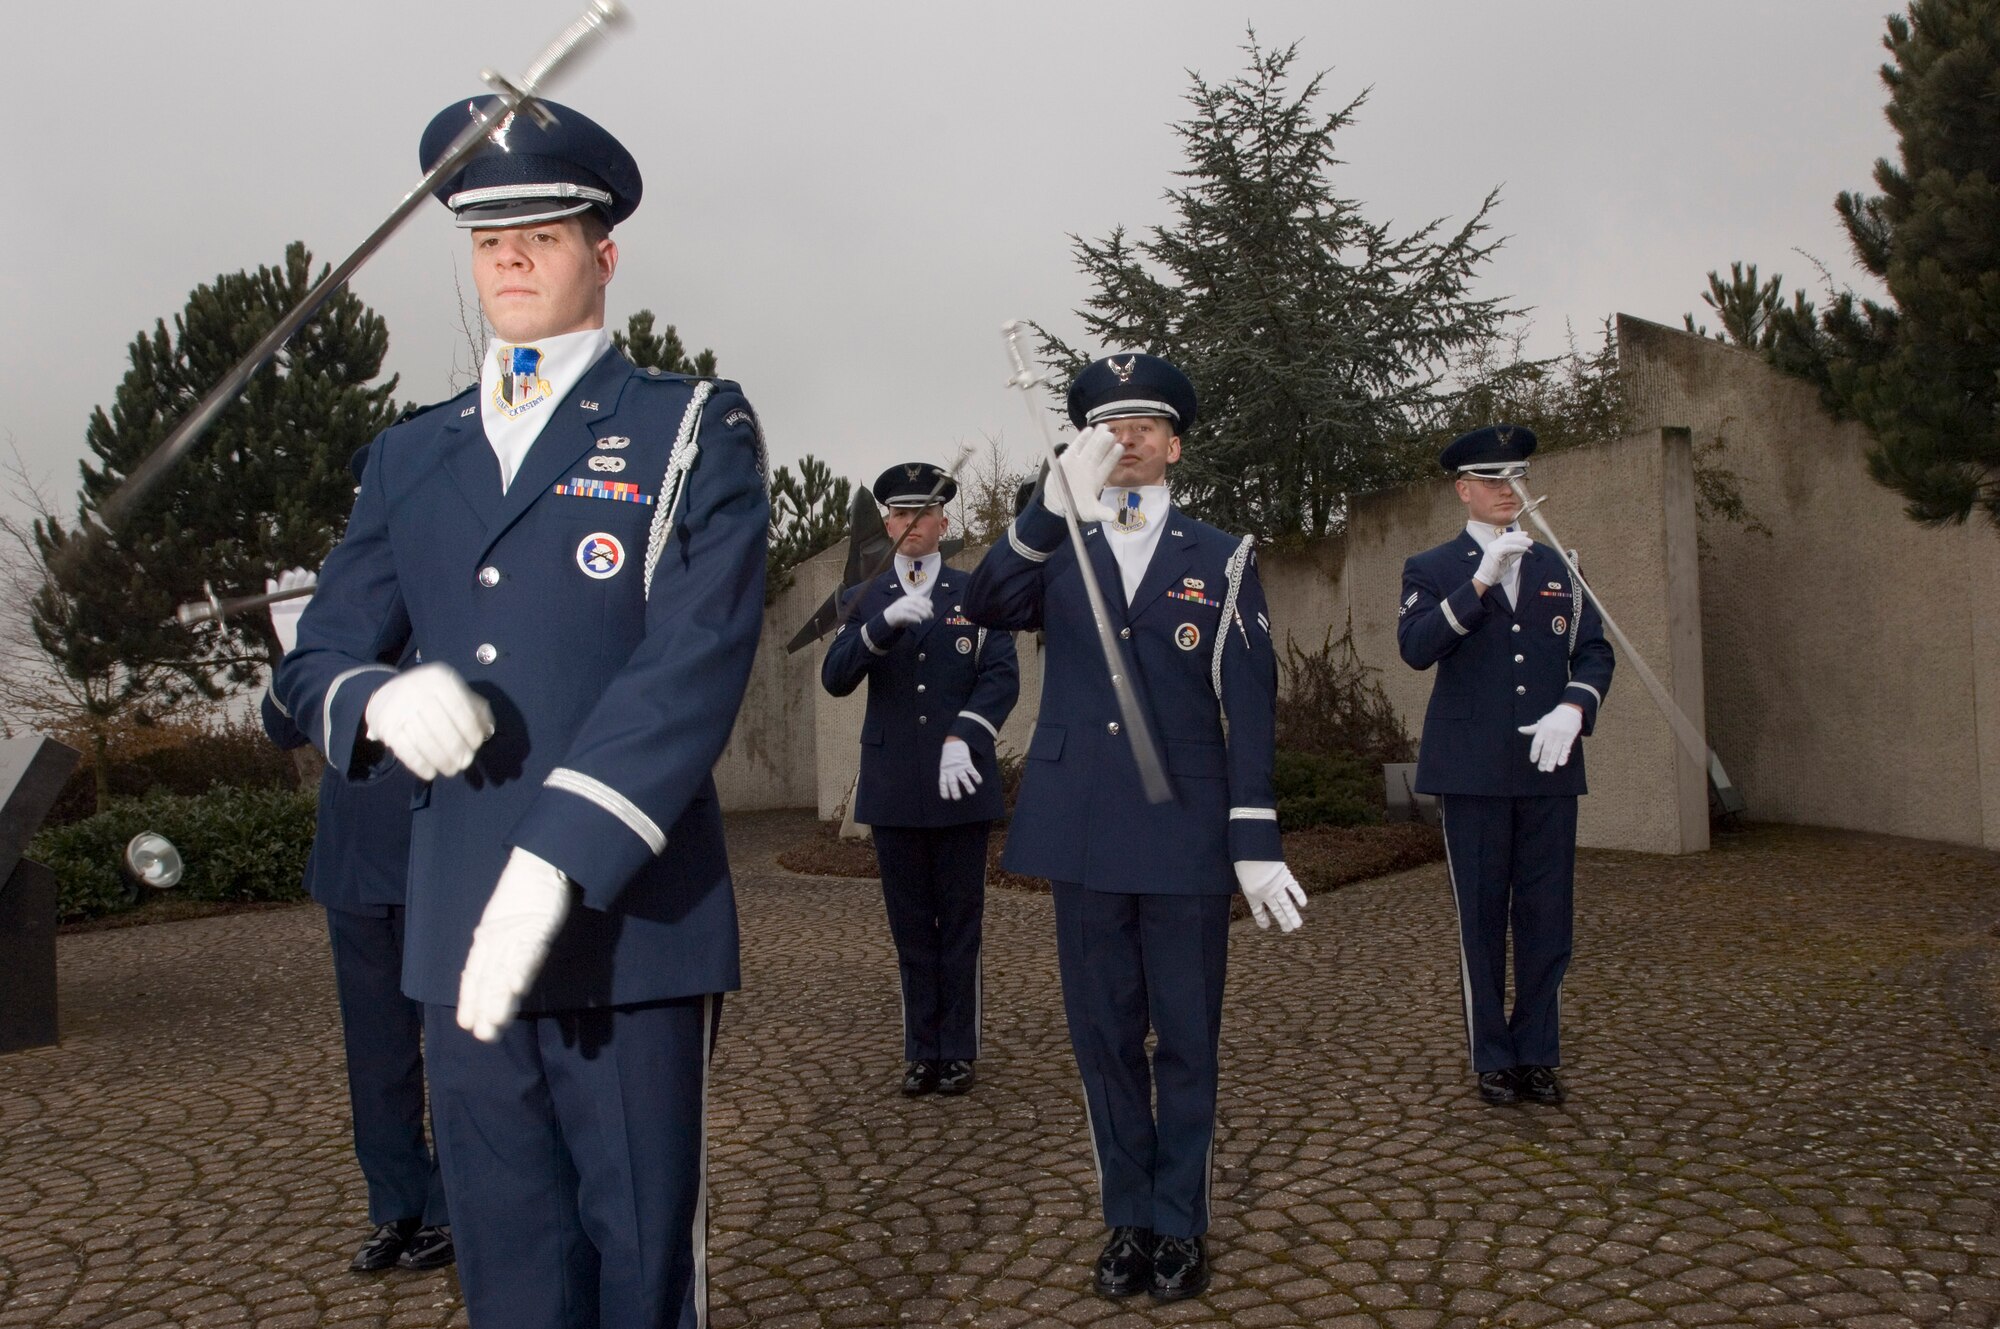 First Lt. Brian Cooper practices with fellow Eifel Sabre Drill Team members, left to right, Airmen 1st Class Jacob McCarty and Dallas Smith and Senior Airman Josh Van Derbeck at Spangdahlem Air Base, Germany, on Tuesday, March 21, 2006. Lieutenant Cooper is a maintenance flight commander for the 52nd Equipment Maintenance Squadron. Airman McCarty is a quality assurance evaluator with the 52nd Civil Engineer Squadron. Airman Smith is a computer networking cryptographic switching system journeyman with the 606th Air Control Squadron. Airman Van Derbeck is an avionics specialist with the 22nd Aircraft Maintenance Unit. (U.S. Air Force photo/Master Sgt. John E. Lasky) 

